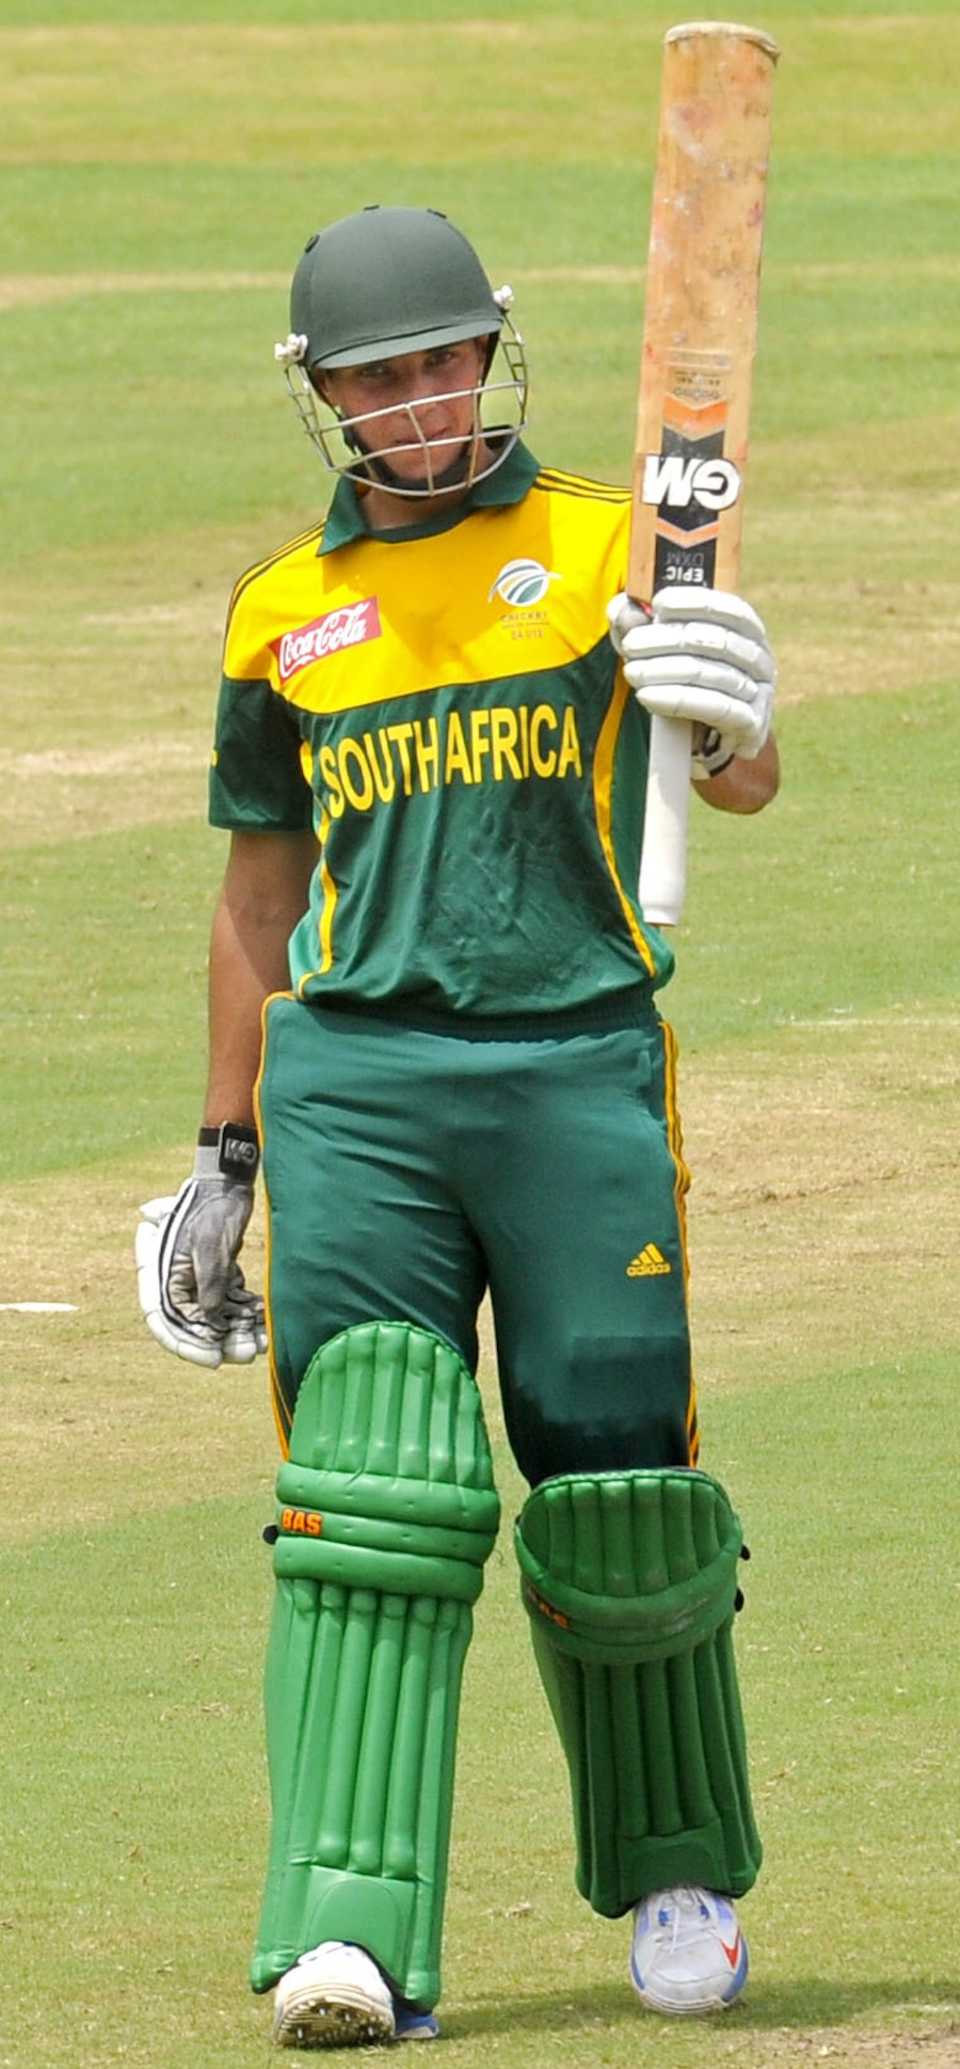 Yaseen Valli's 64 helped South Africa put on a strong score